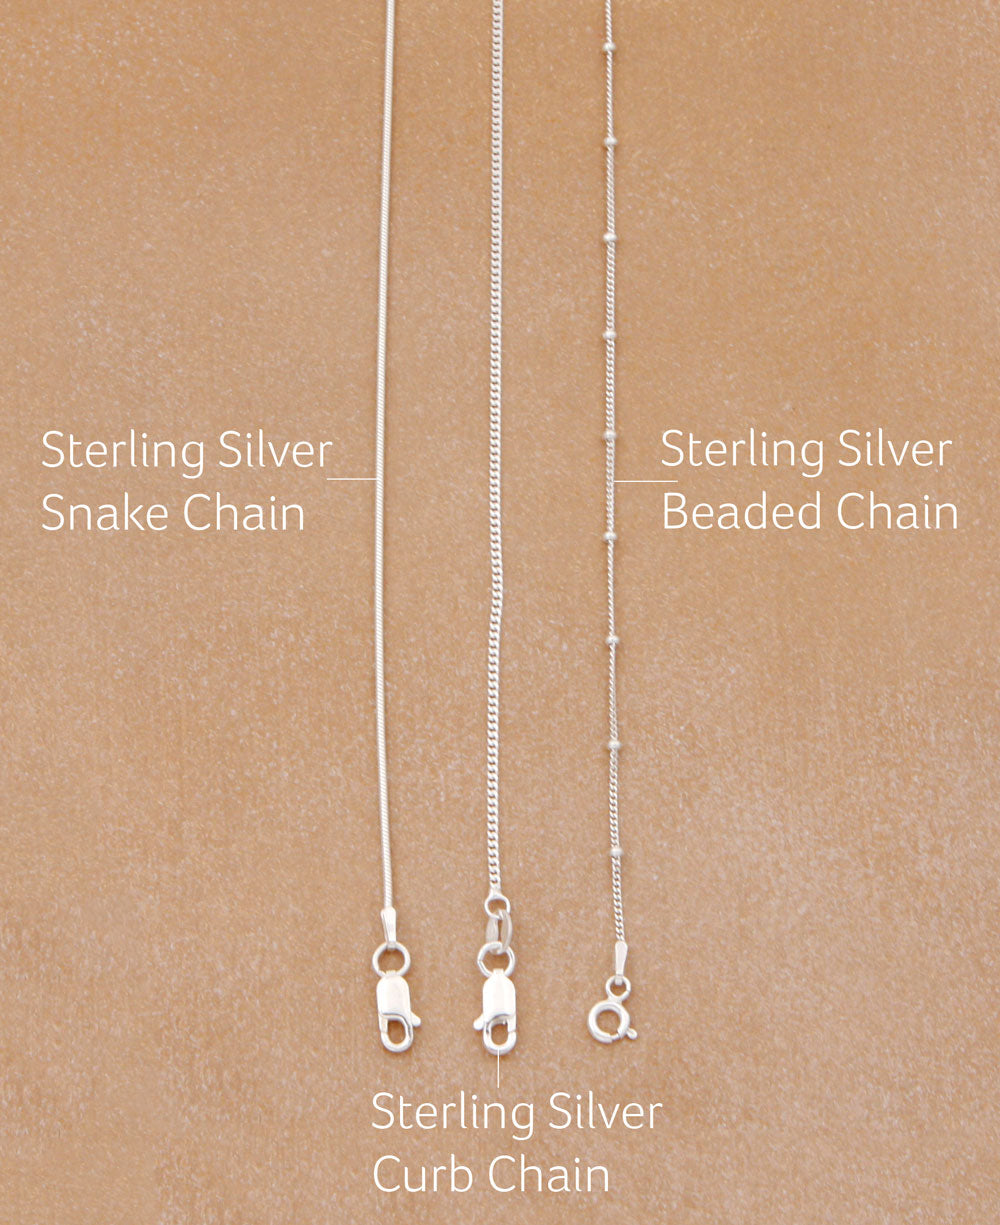 Italian Made Sterling Chains